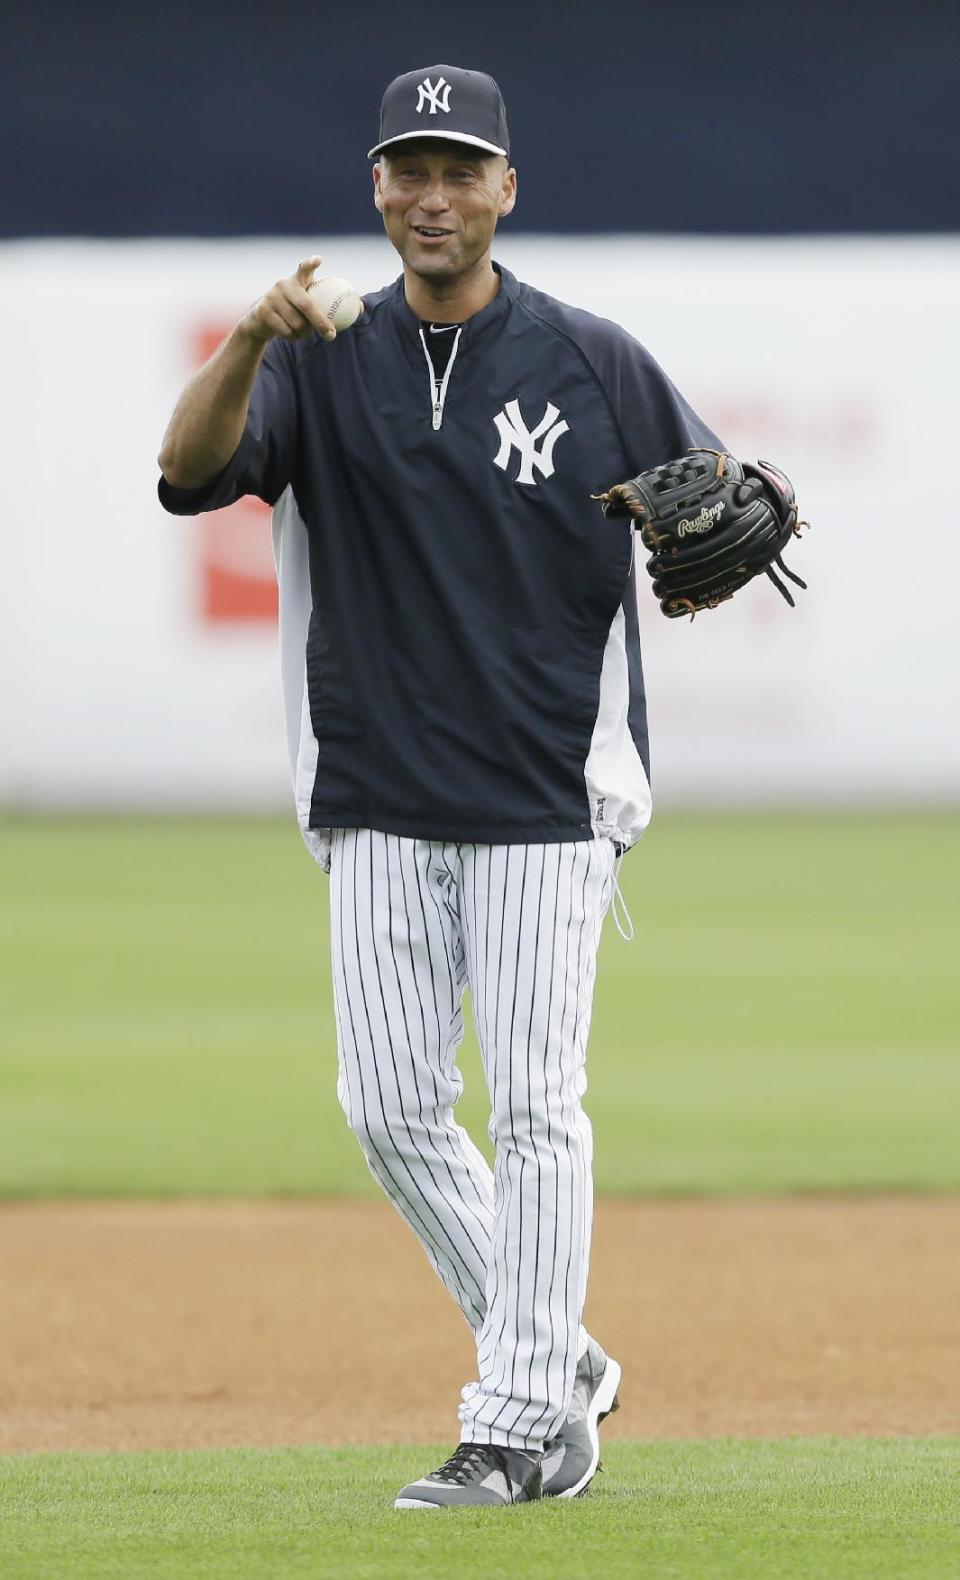 New York Yankees shortstop Derek Jeter warms up before an exhibition baseball game against the Pittsburgh Pirates Thursday, Feb. 27, 2014, in Tampa, Fla. (AP Photo/Charlie Neibergall)